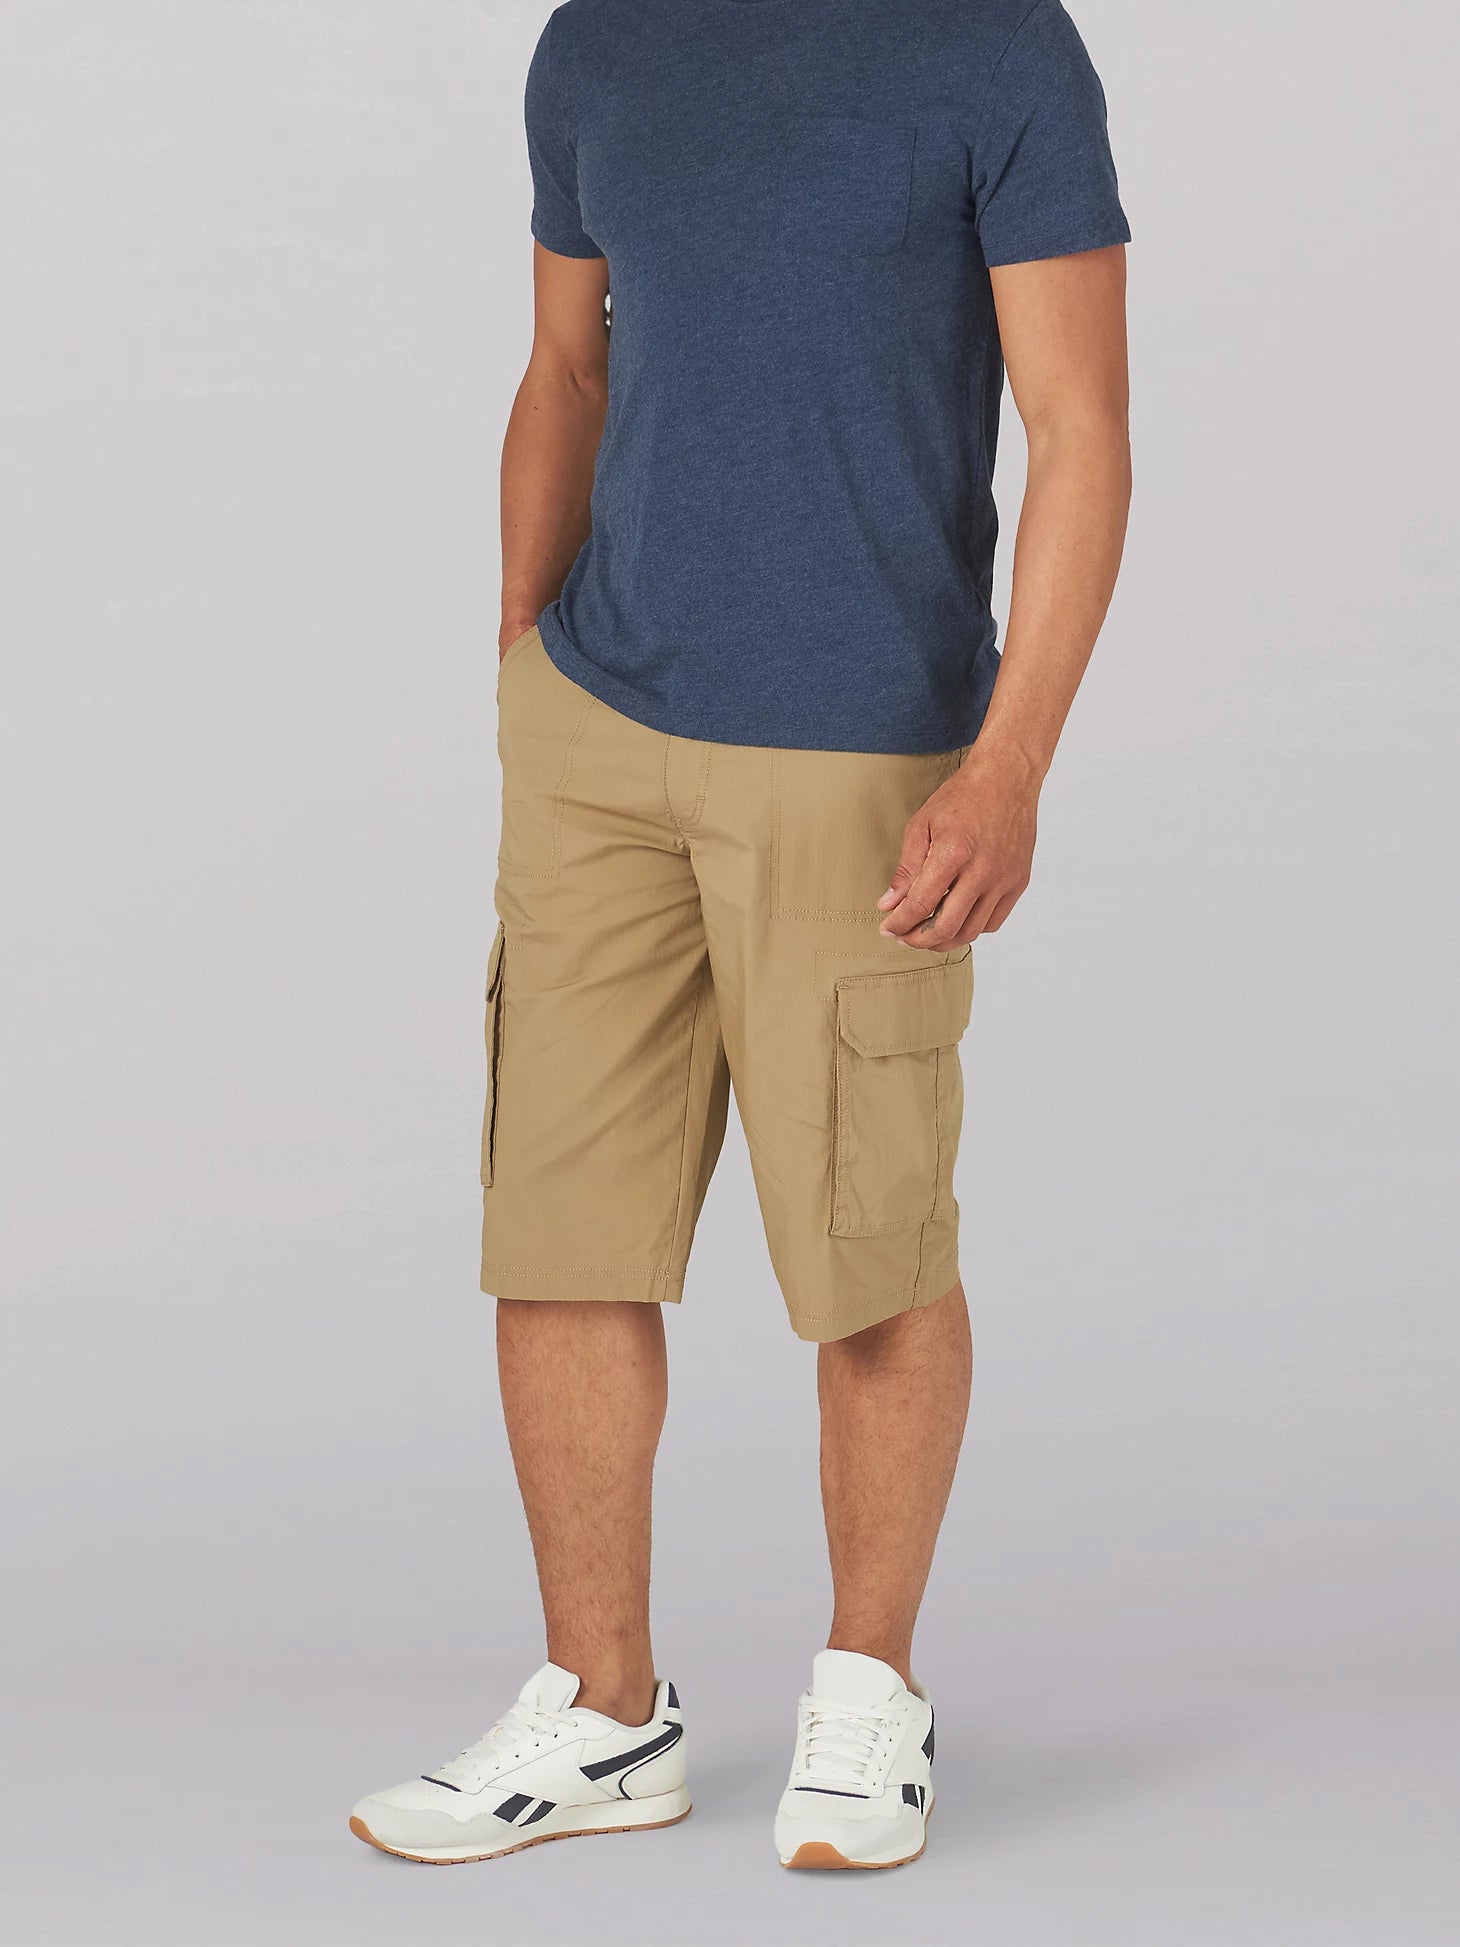 Lee 2314313 Extreme Motion Cameron Relaxed Cargo Shorts in KC Khaki Front View